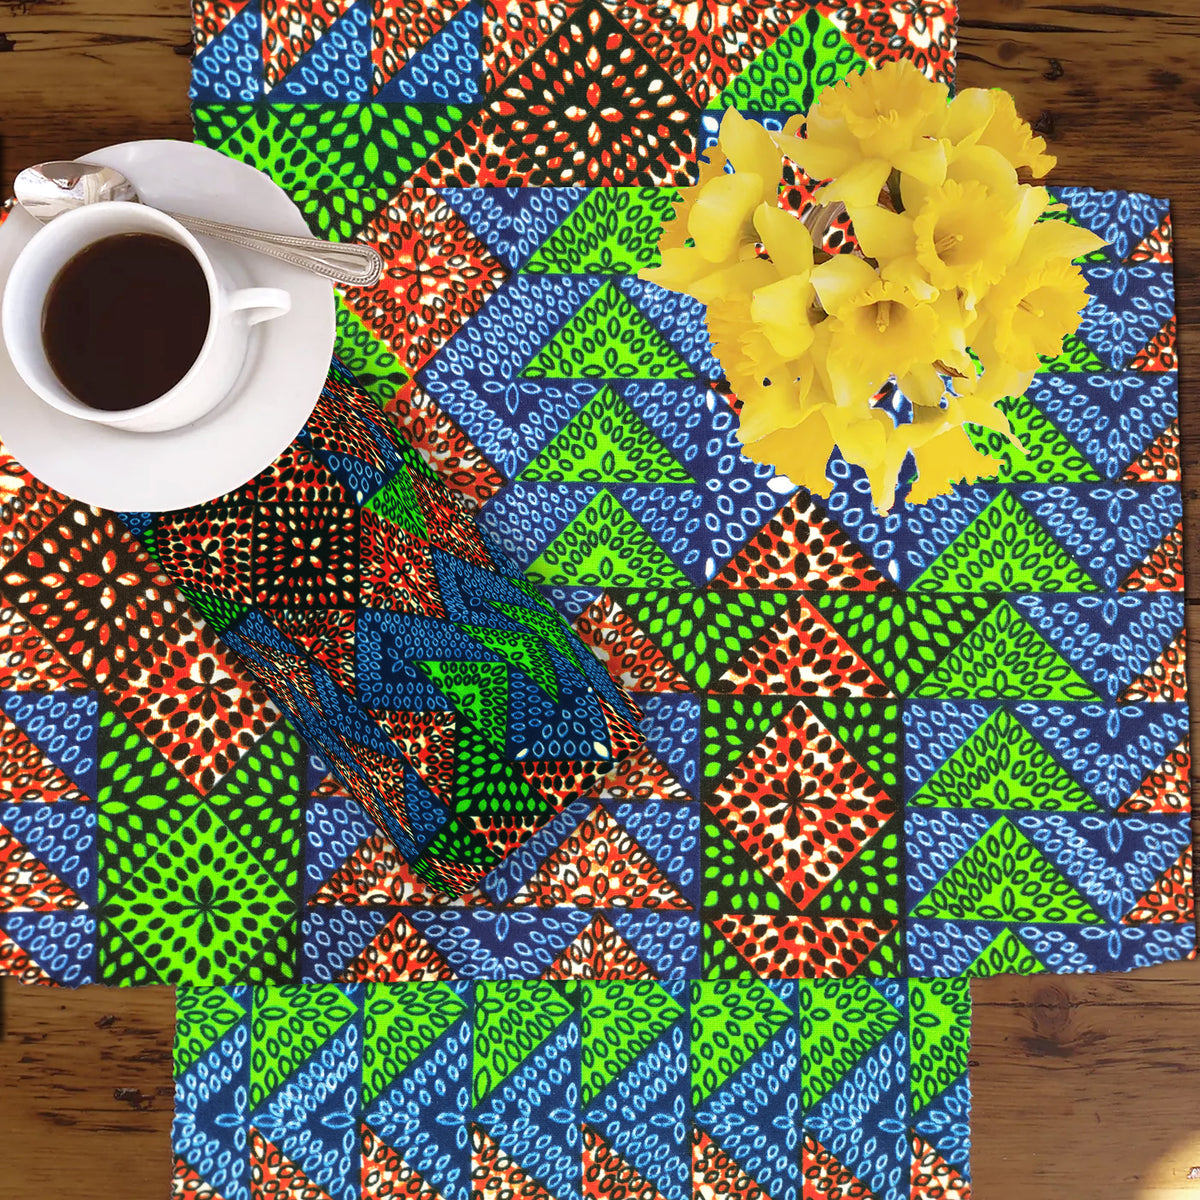 Better Together PlaceMat Bundle - African Print